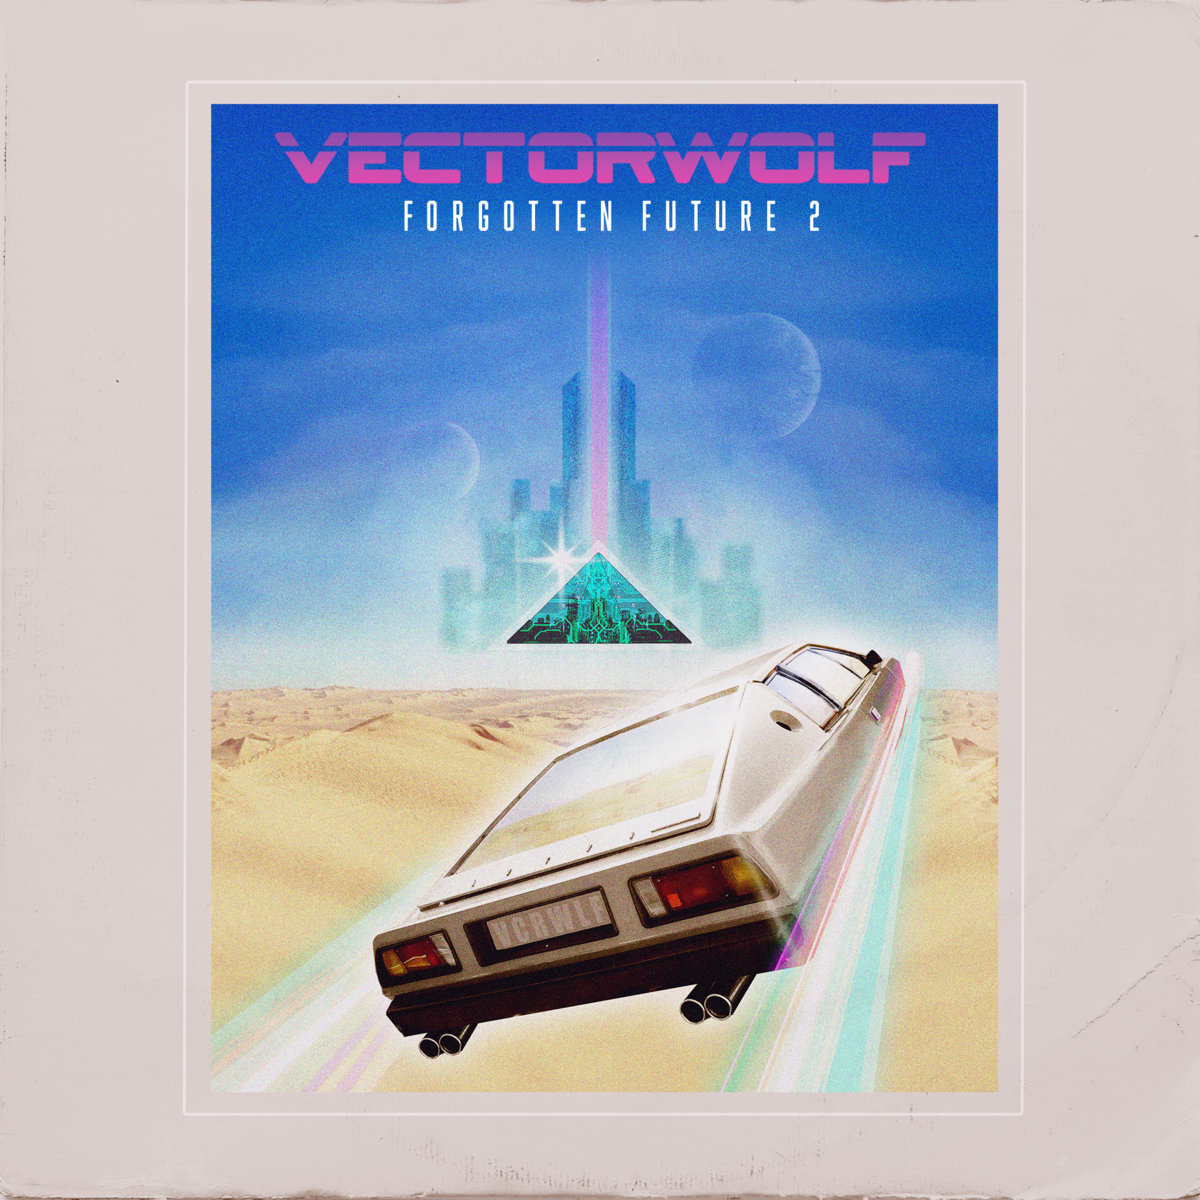 a4199329125 10 - Retrowave goes DnB with VECTORWOLF